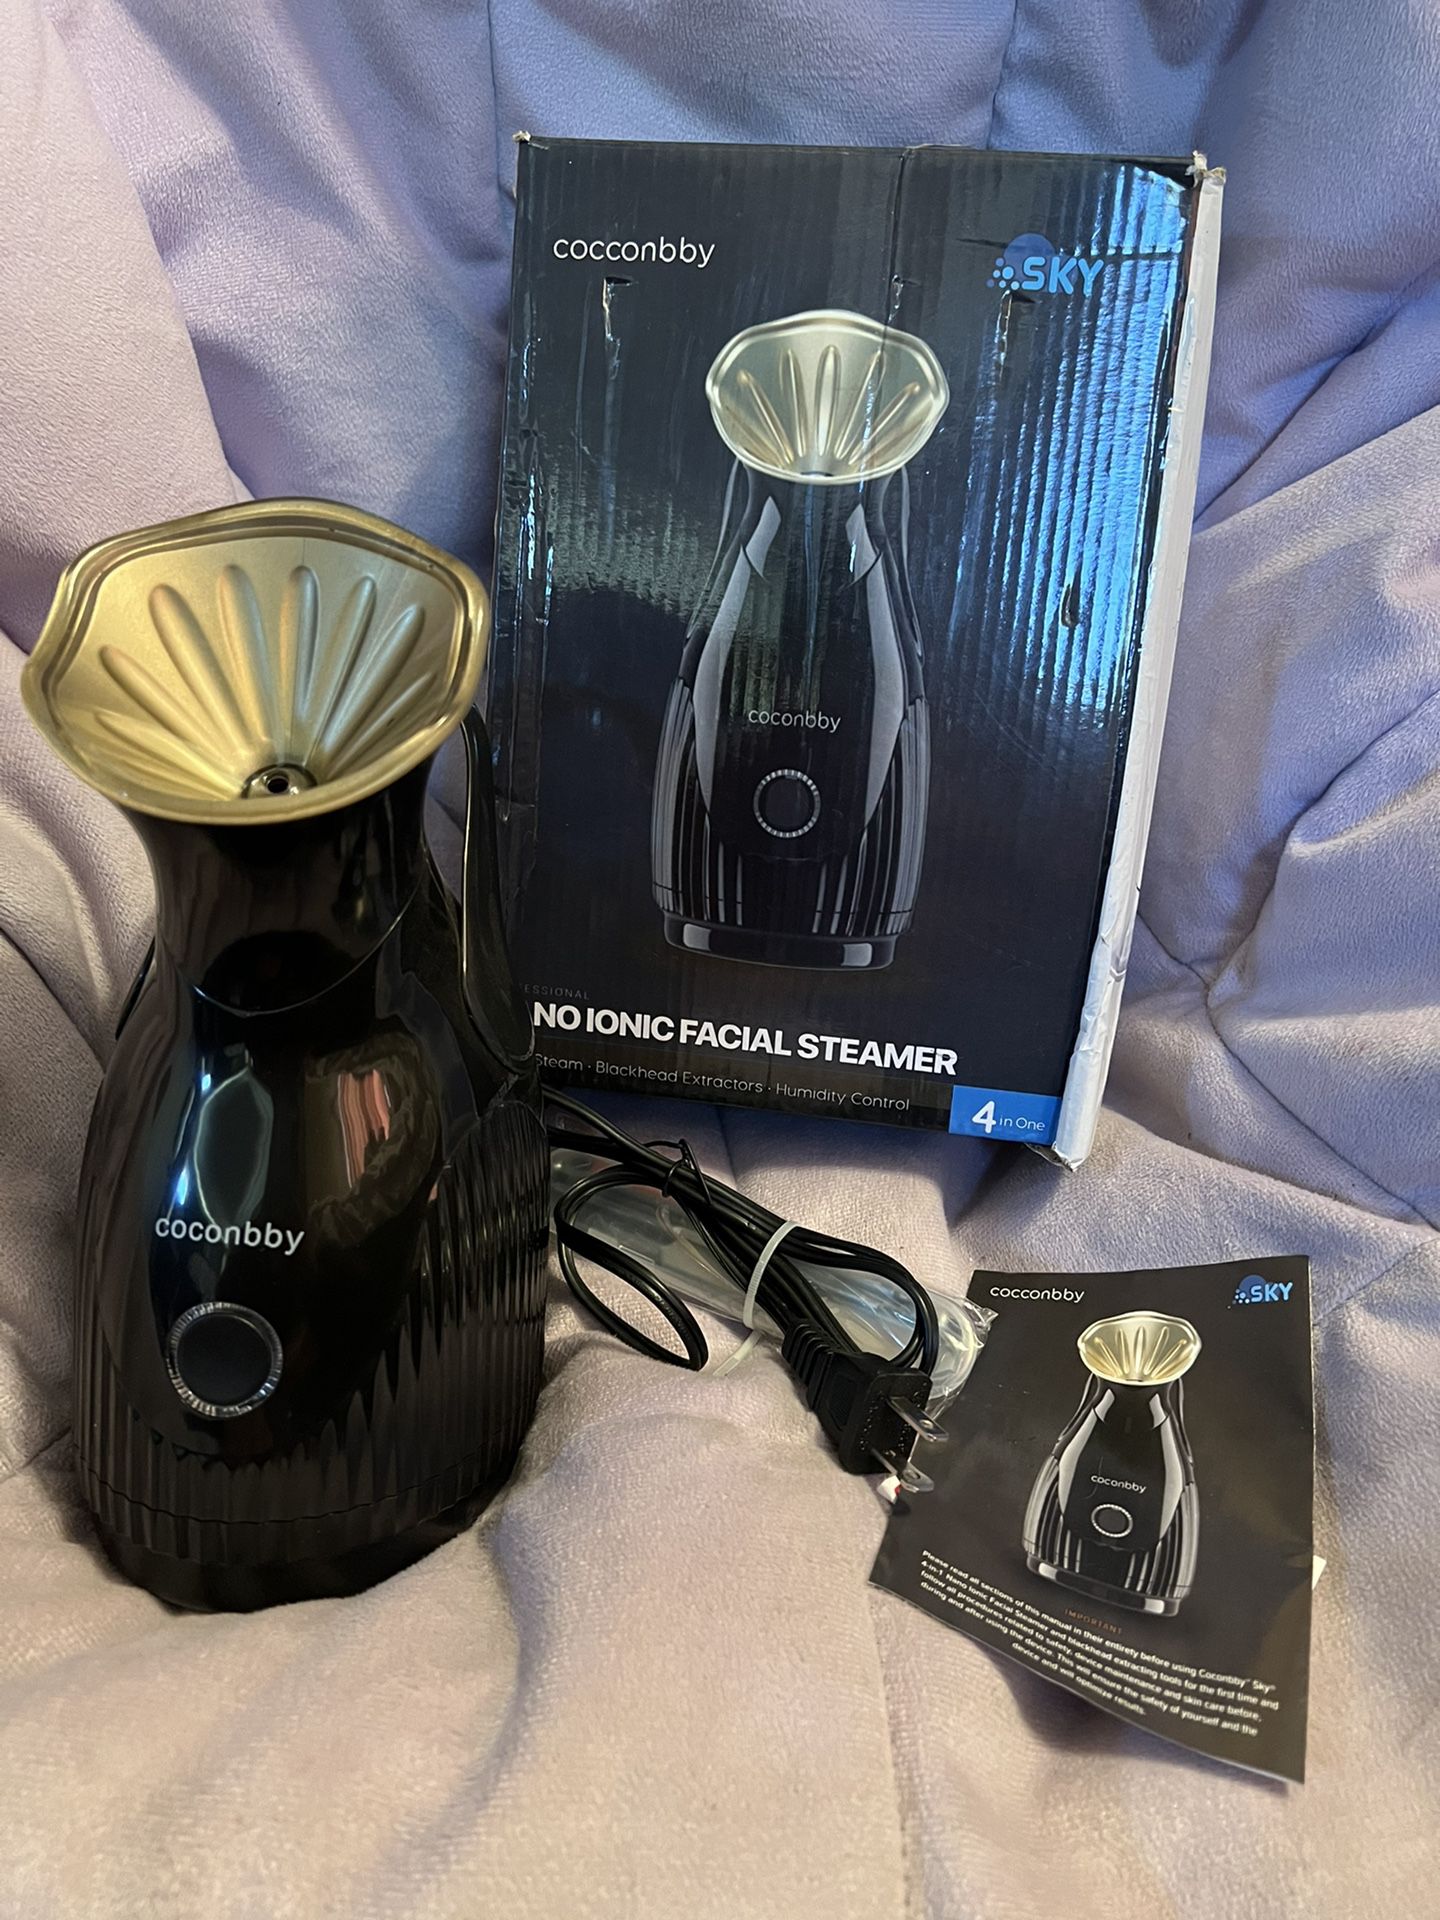 New Cocconbby Nano ionic 4 In 1 Facial Steamer 